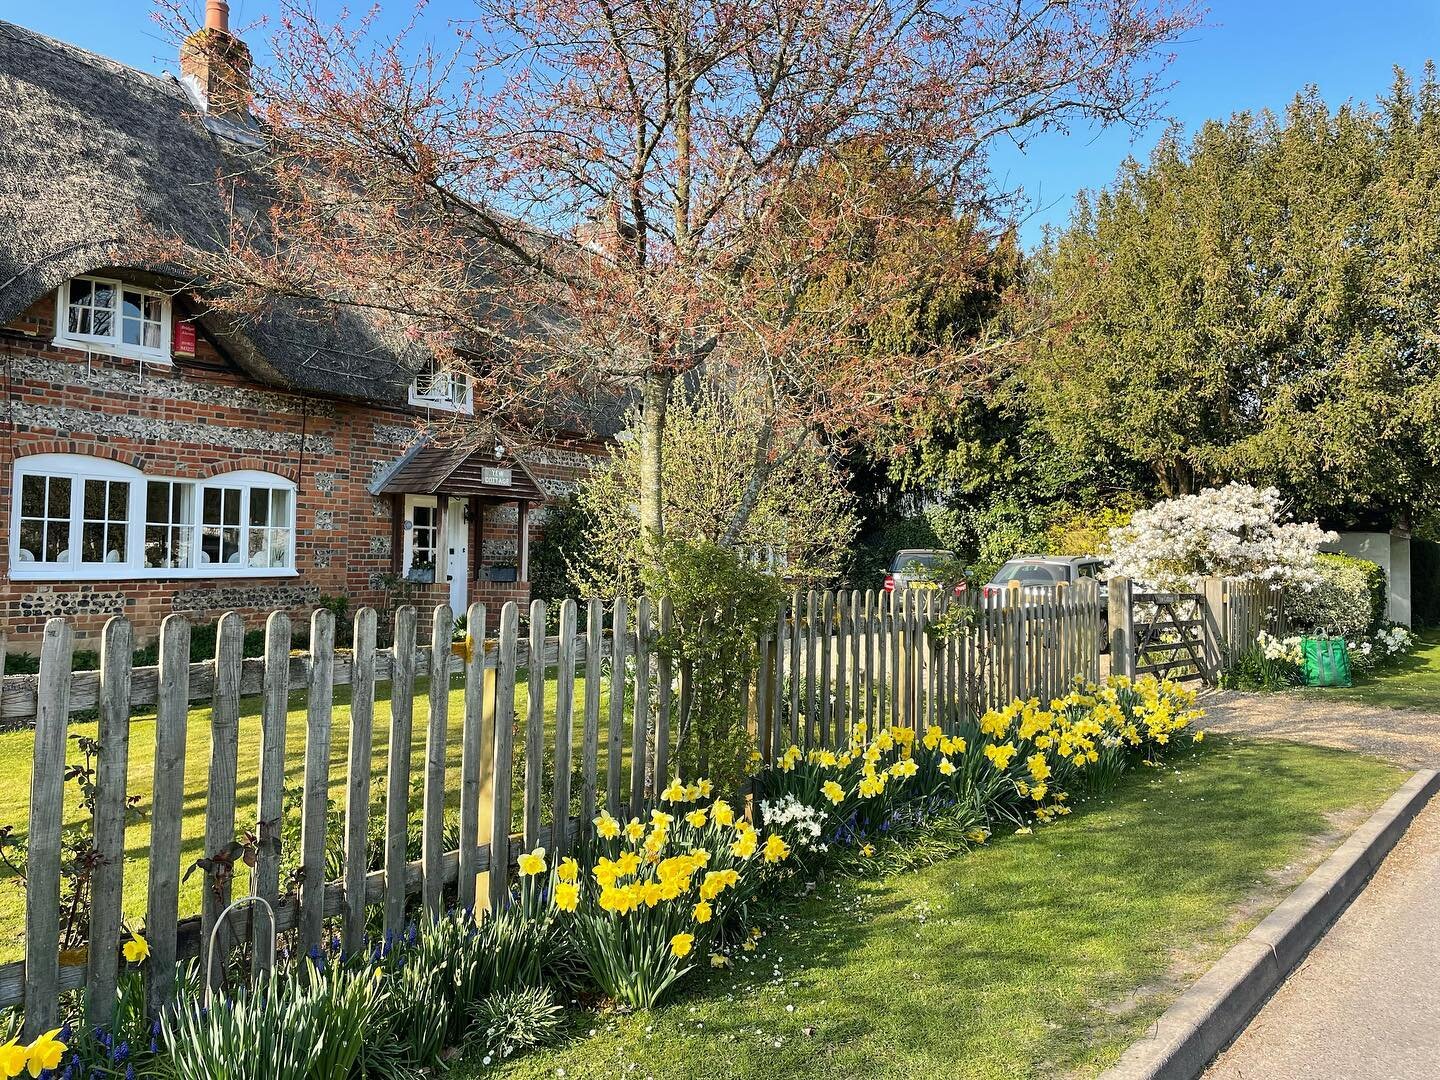 Spring is in the air! It is such a pleasure watching the bulbs pop up and flower. #springflowers #thatchedstraw #thatchedcottage #thatchedbedandbreakfast #daffodils #magnolia #villagelife